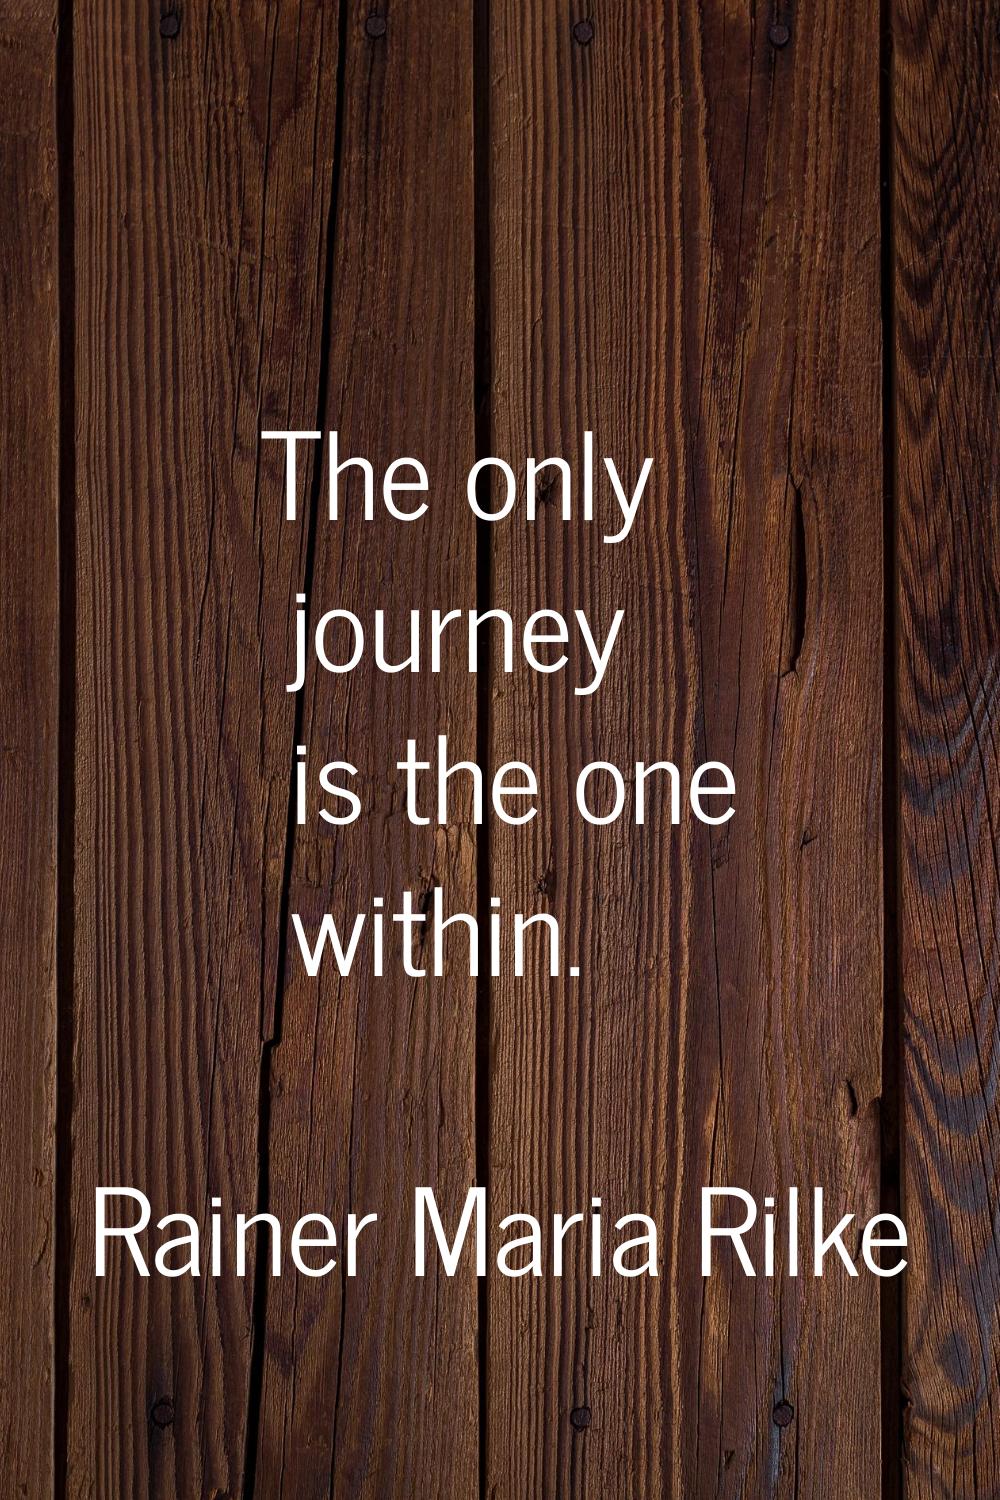 The only journey is the one within.